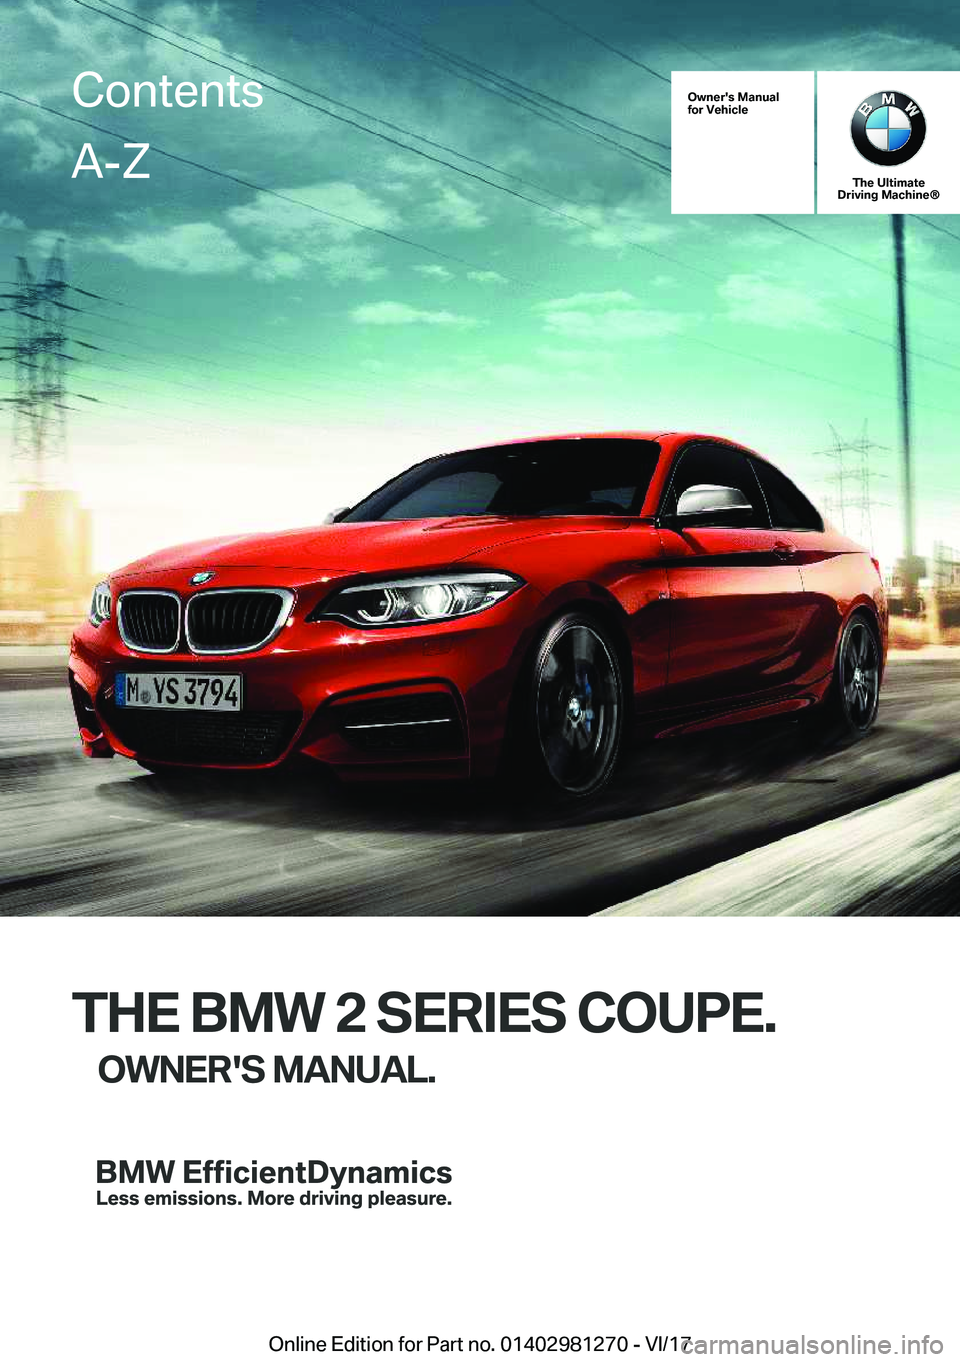 BMW 2 SERIES COUPE 2018  Owners Manual �O�w�n�e�r�'�s��M�a�n�u�a�l
�f�o�r��V�e�h�i�c�l�e
�T�h�e��U�l�t�i�m�a�t�e
�D�r�i�v�i�n�g��M�a�c�h�i�n�e�n
�T�H�E��B�M�W��2��S�E�R�I�E�S��C�O�U�P�E�.
�O�W�N�E�R�'�S��M�A�N�U�A�L�.
�C�o